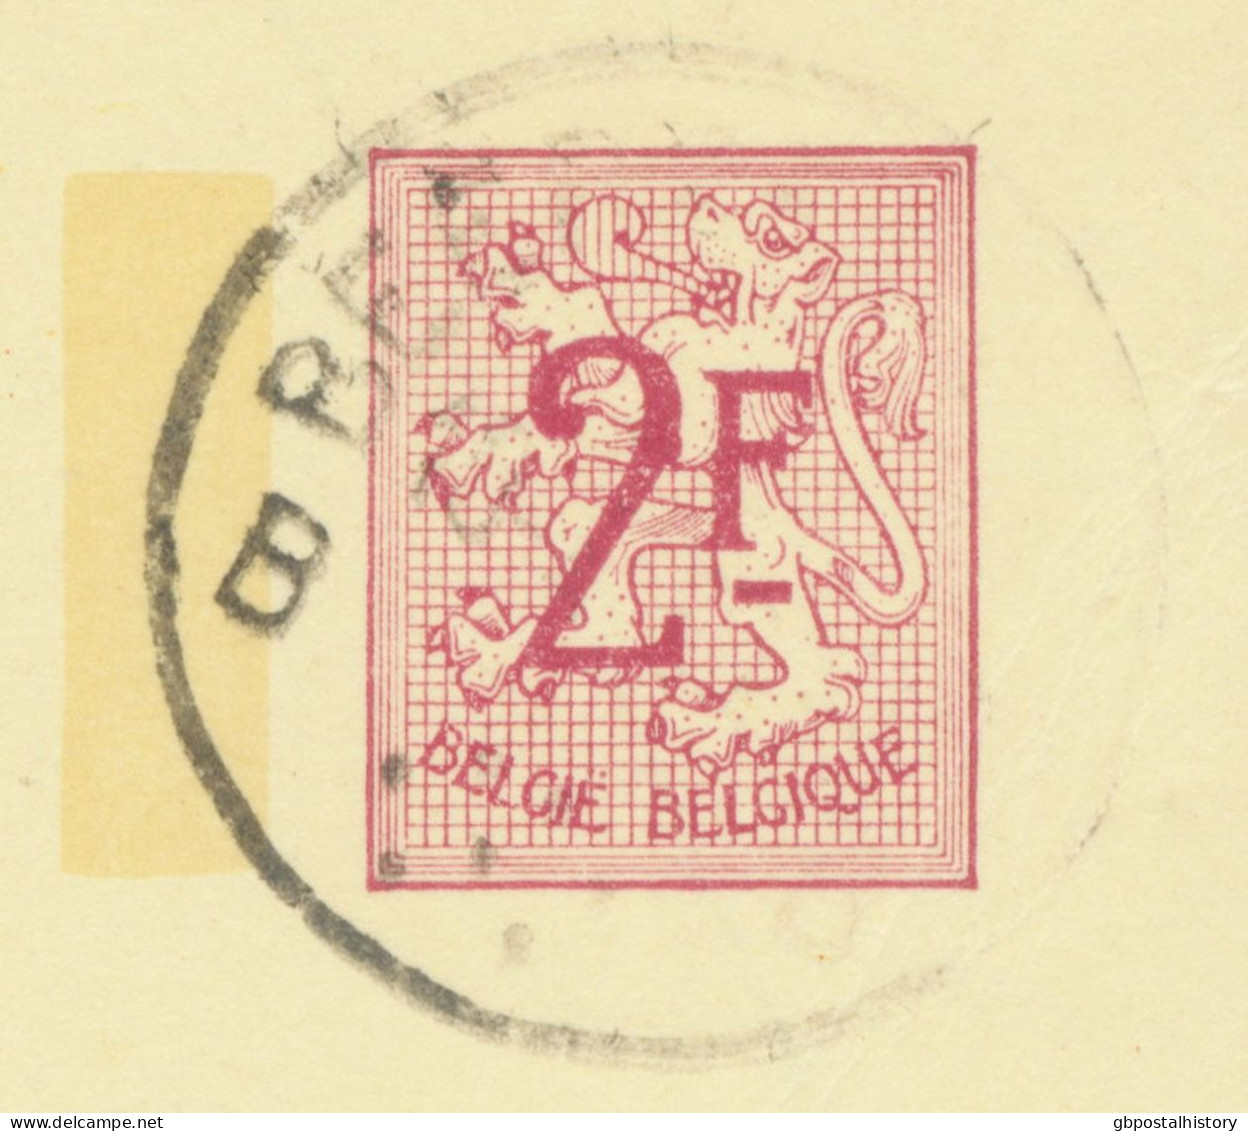 BELGIUM VILLAGE POSTMARKS  BEERZEL B (now Putte) SC With Dots 1969 (Postal Stationery 2 F, PUBLIBEL 2298 N) - Annulli A Punti